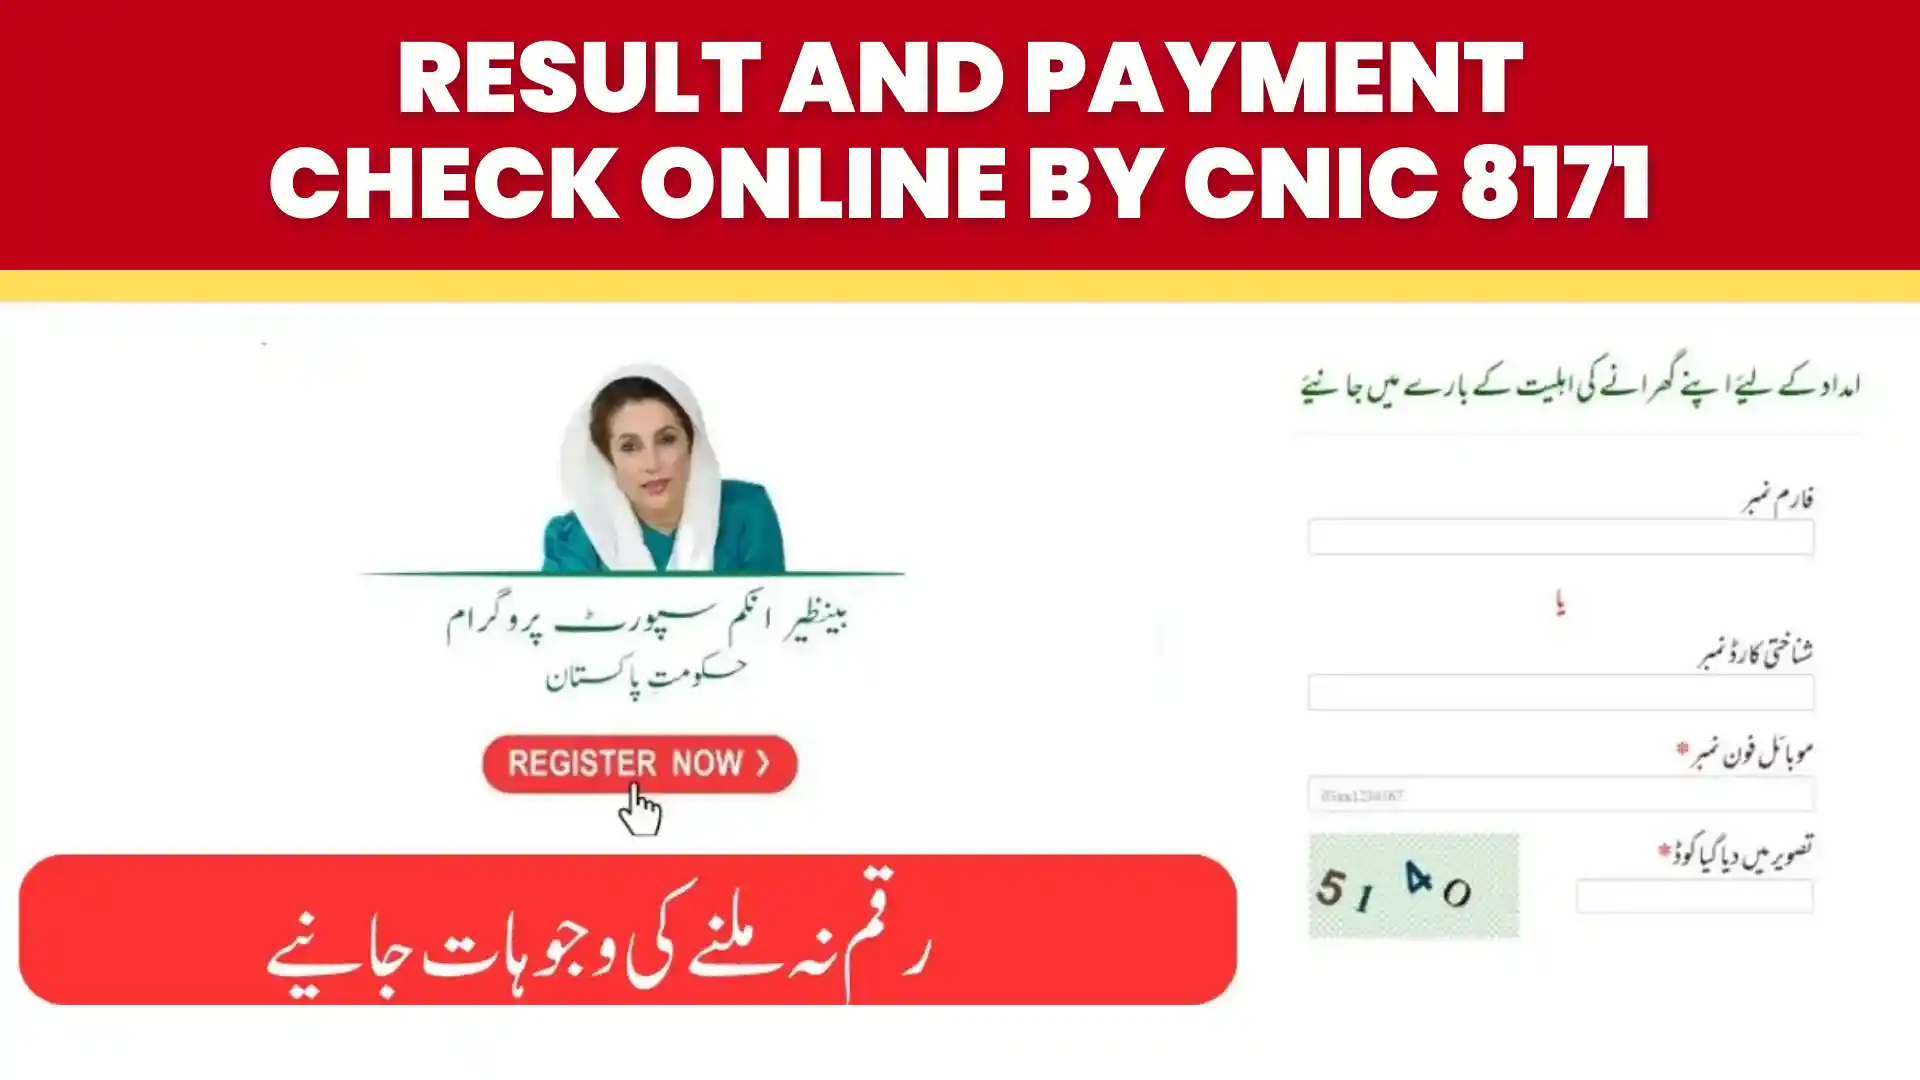 Result And Payment Check Online by CNIC 8171